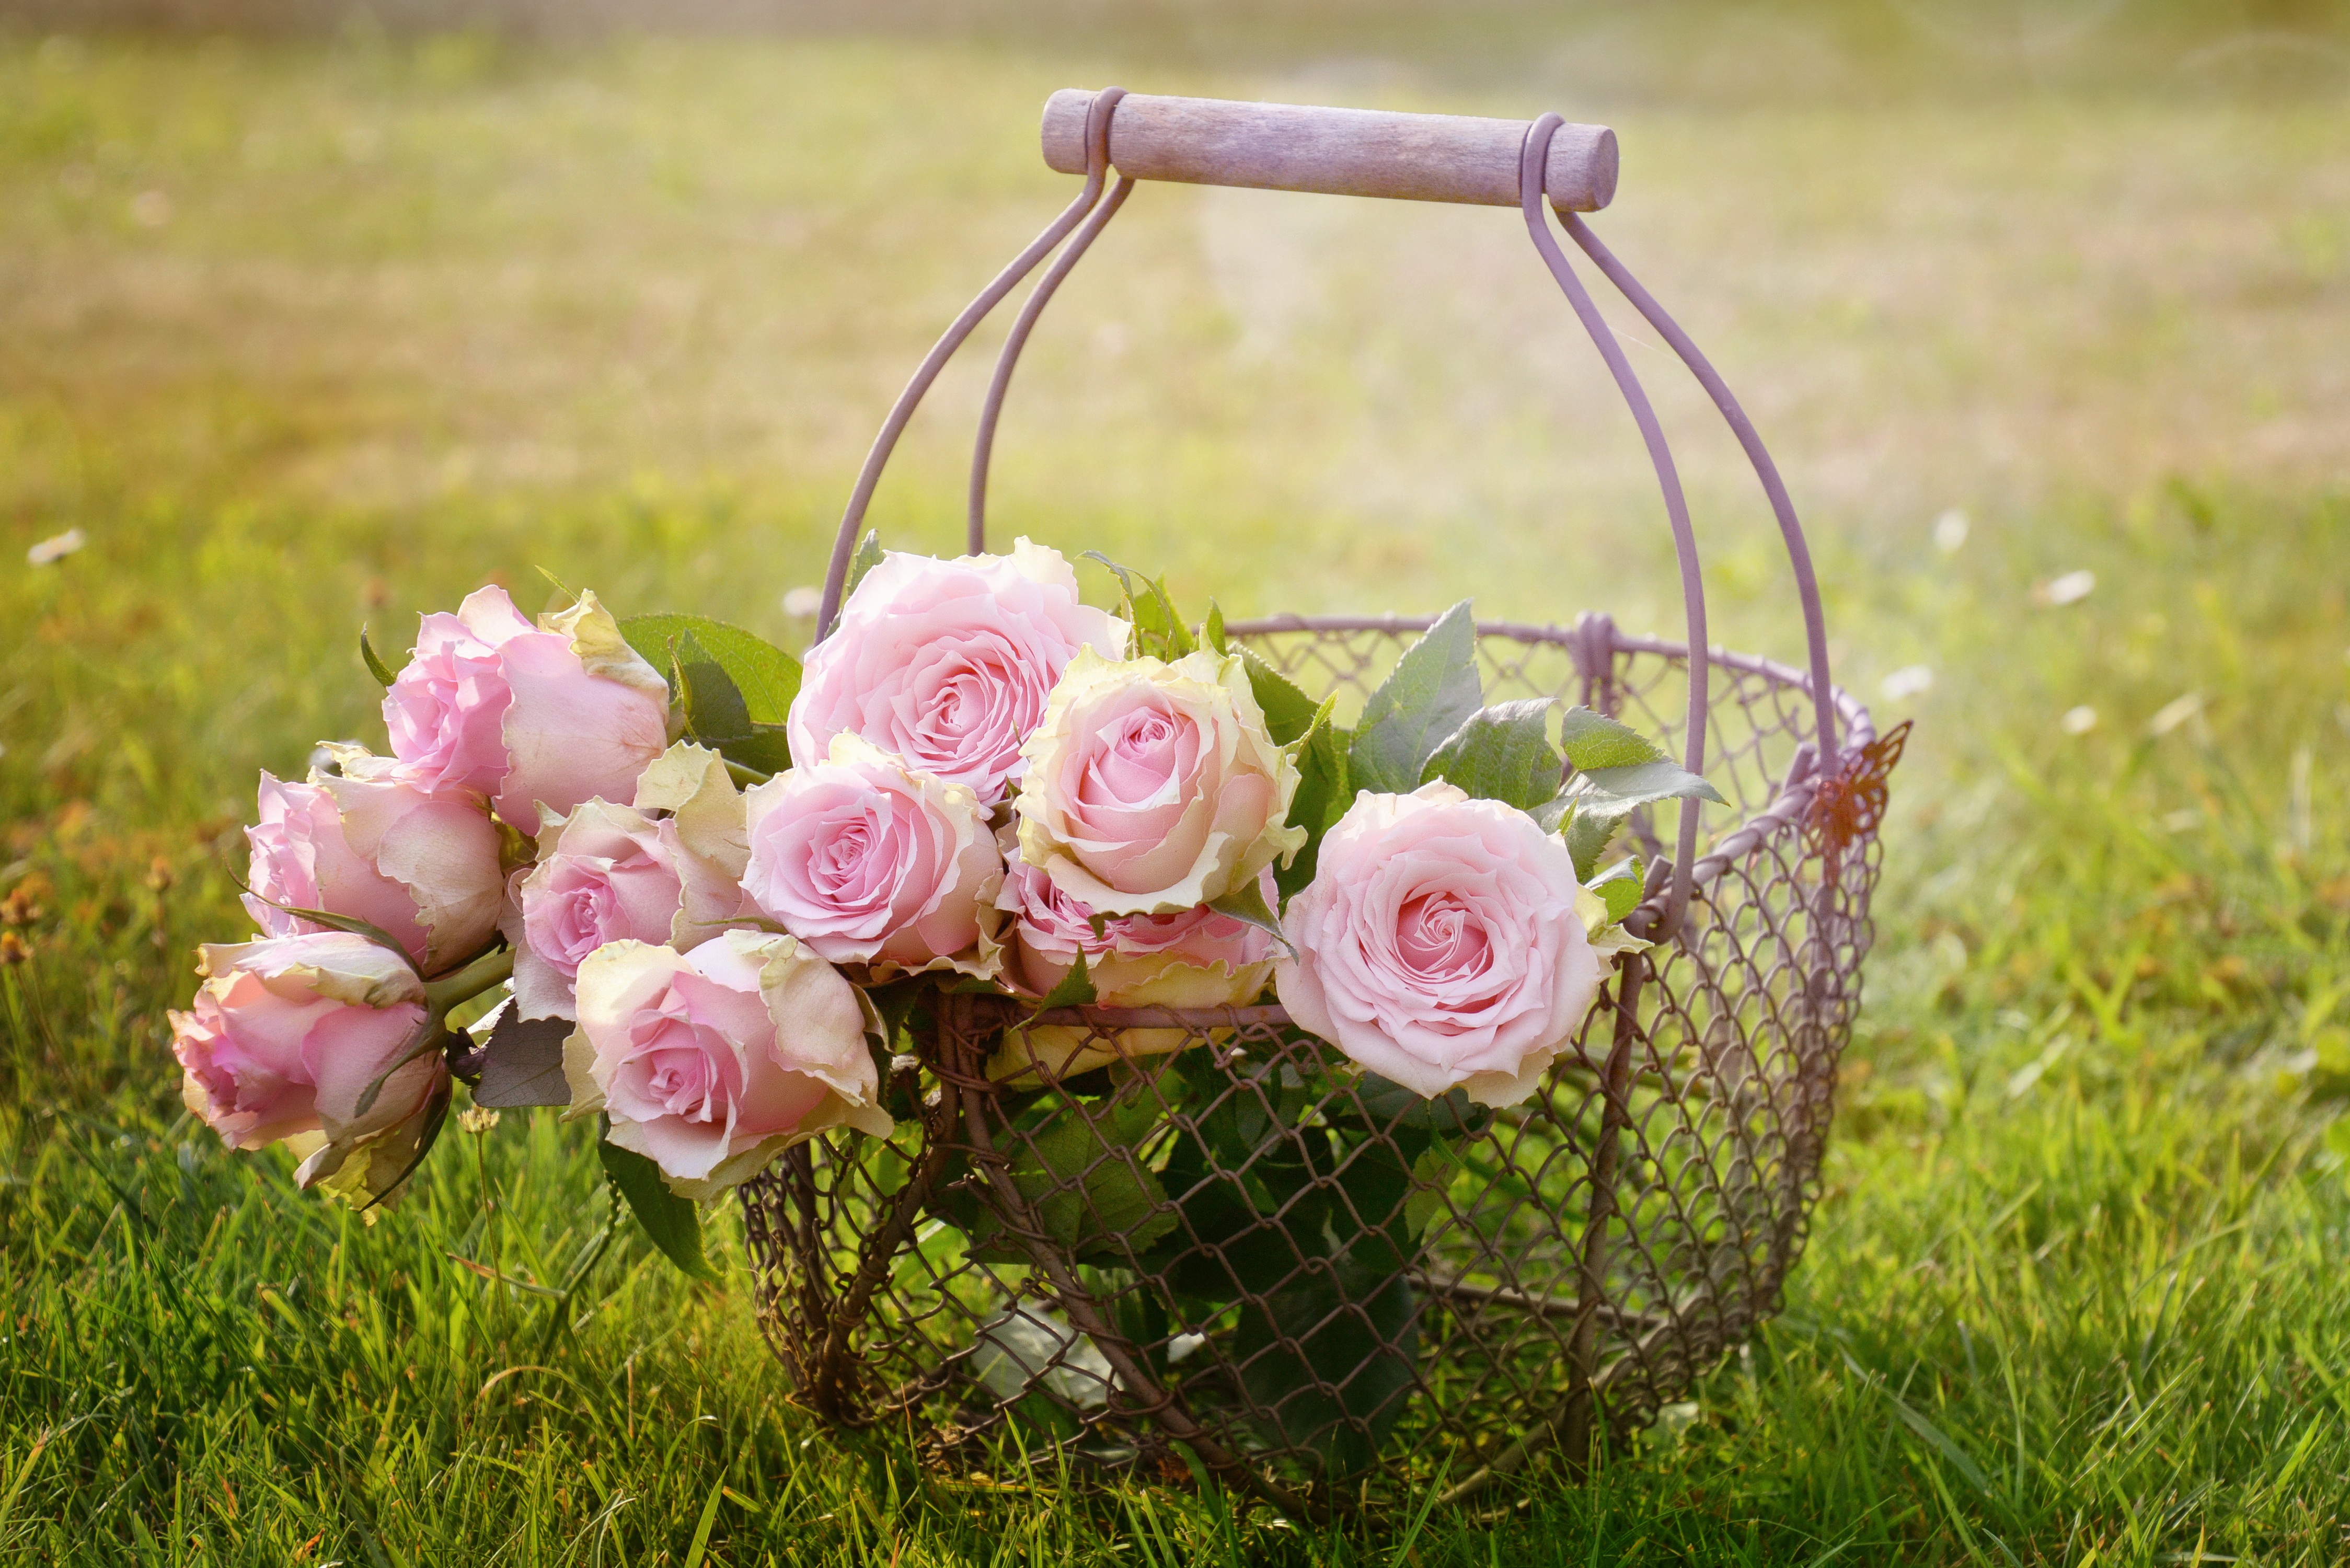 Free photo Basket with beautiful pink flowers